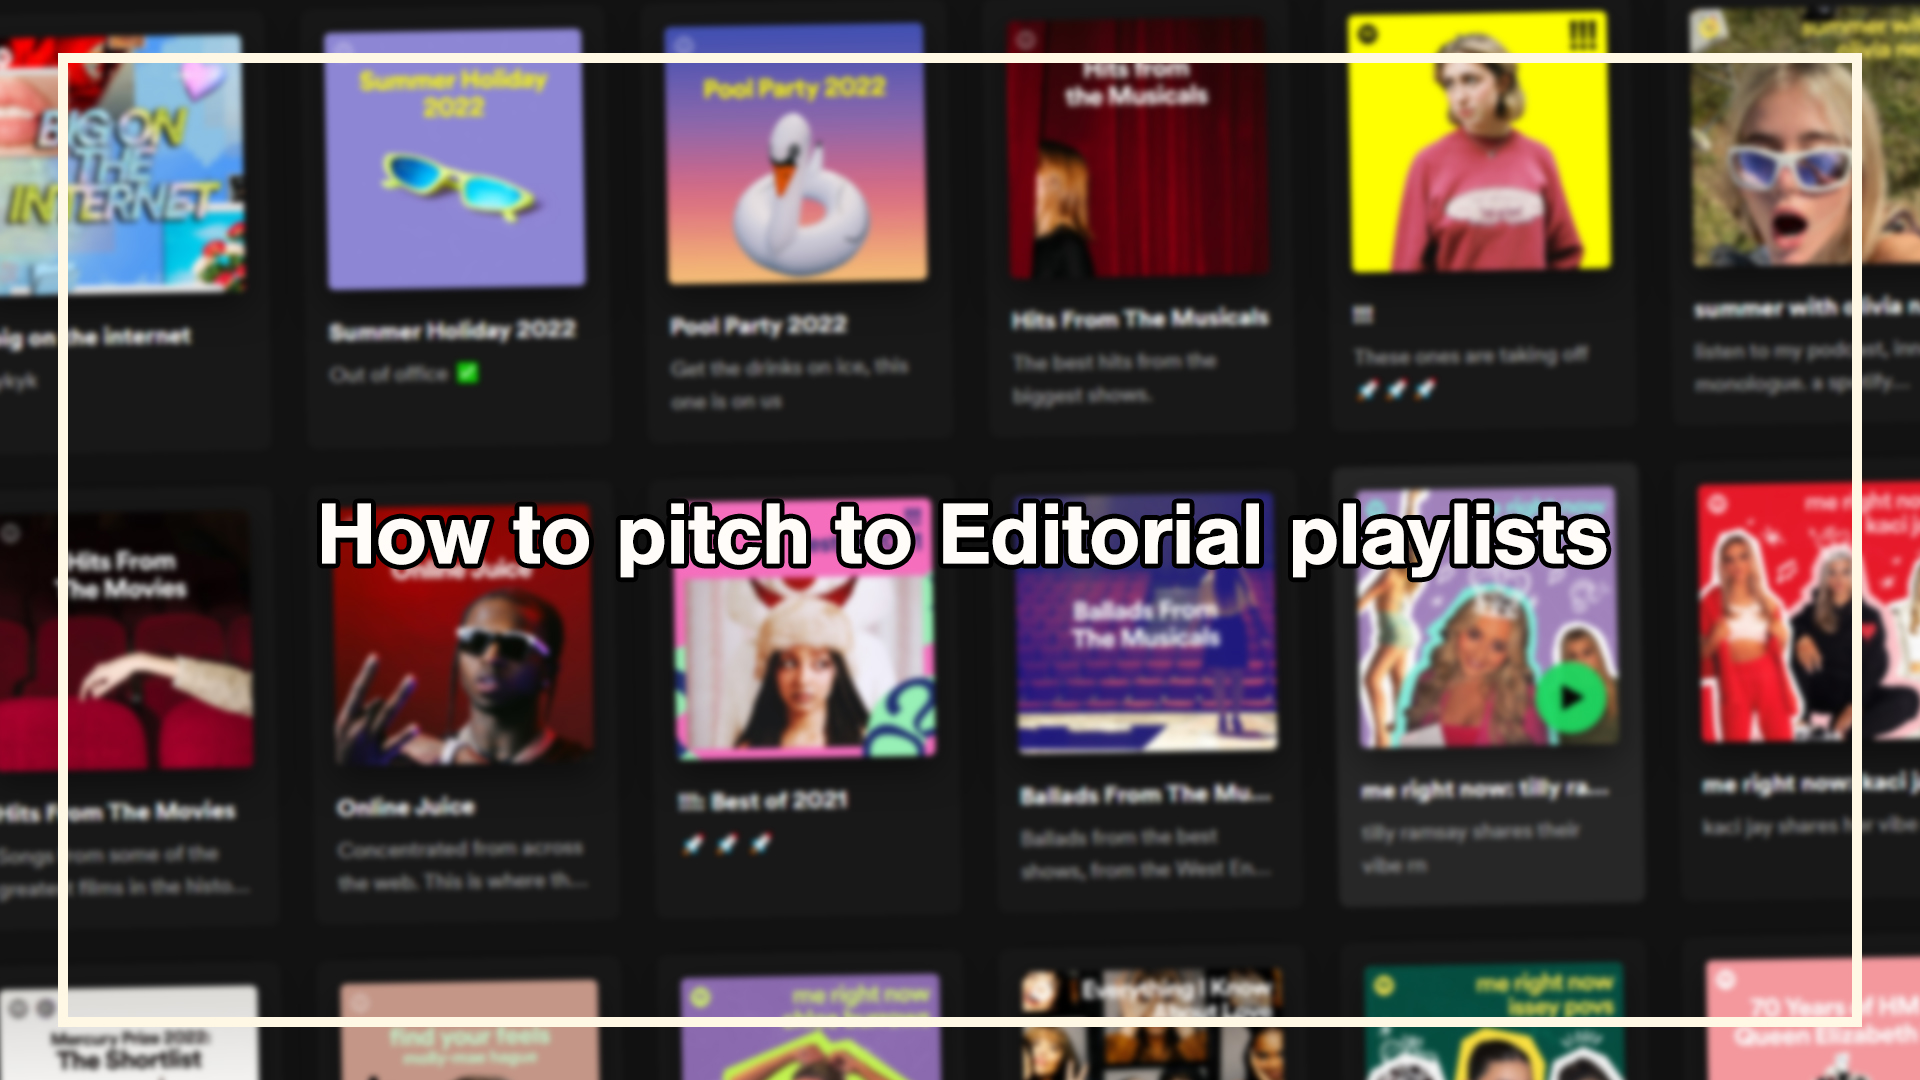 How to pitch to Editorial playlists